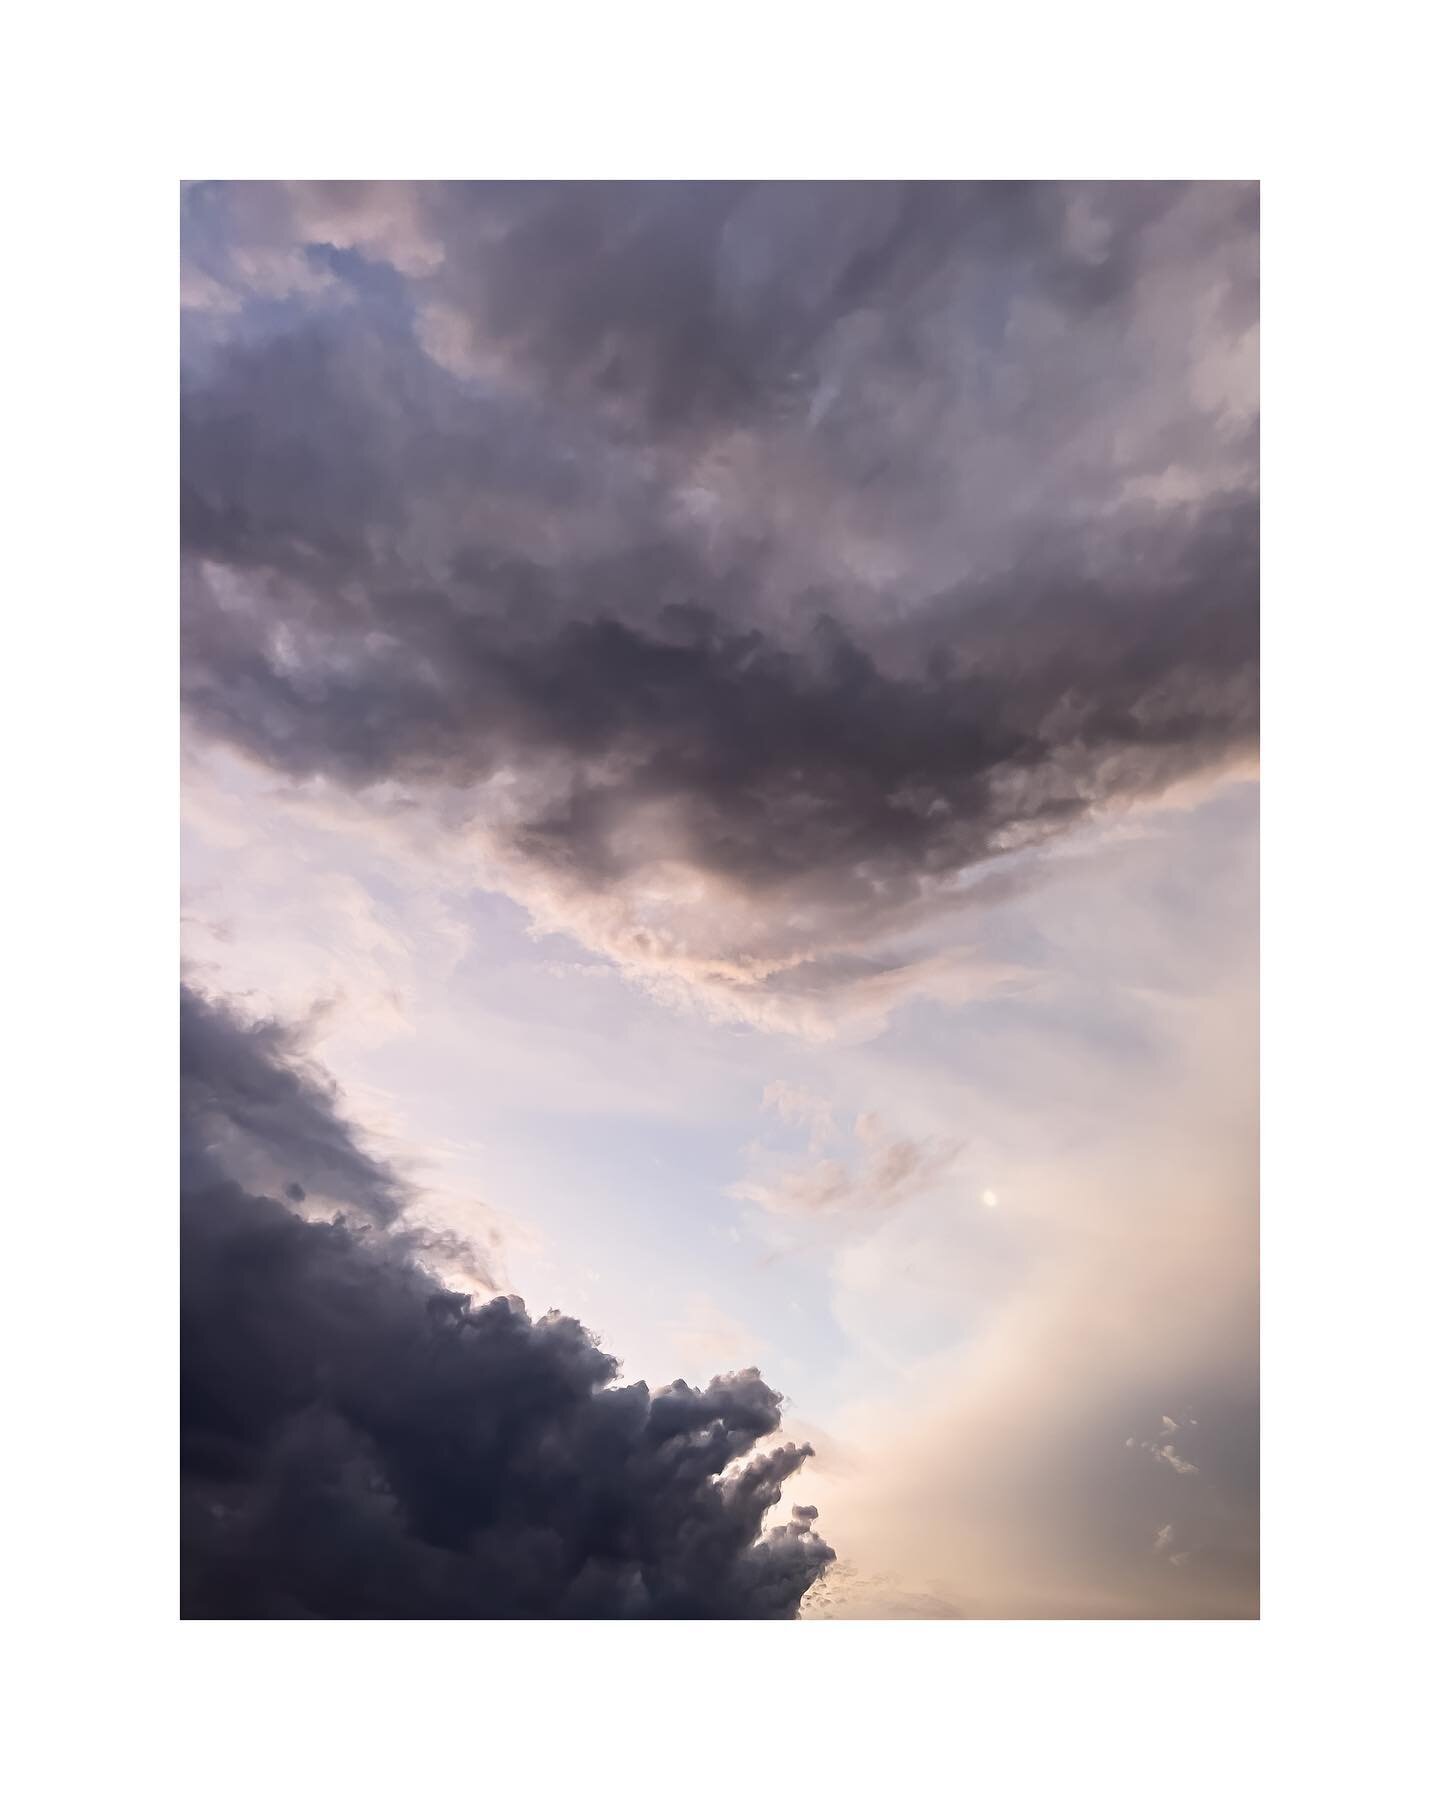 Nature is the ultimate muse, and today's skies and clouds were no exception. Capturing these moments on a phone camera is a great reminder that with a little patience and experimentation, anything is possible. Don't be afraid to play with different a